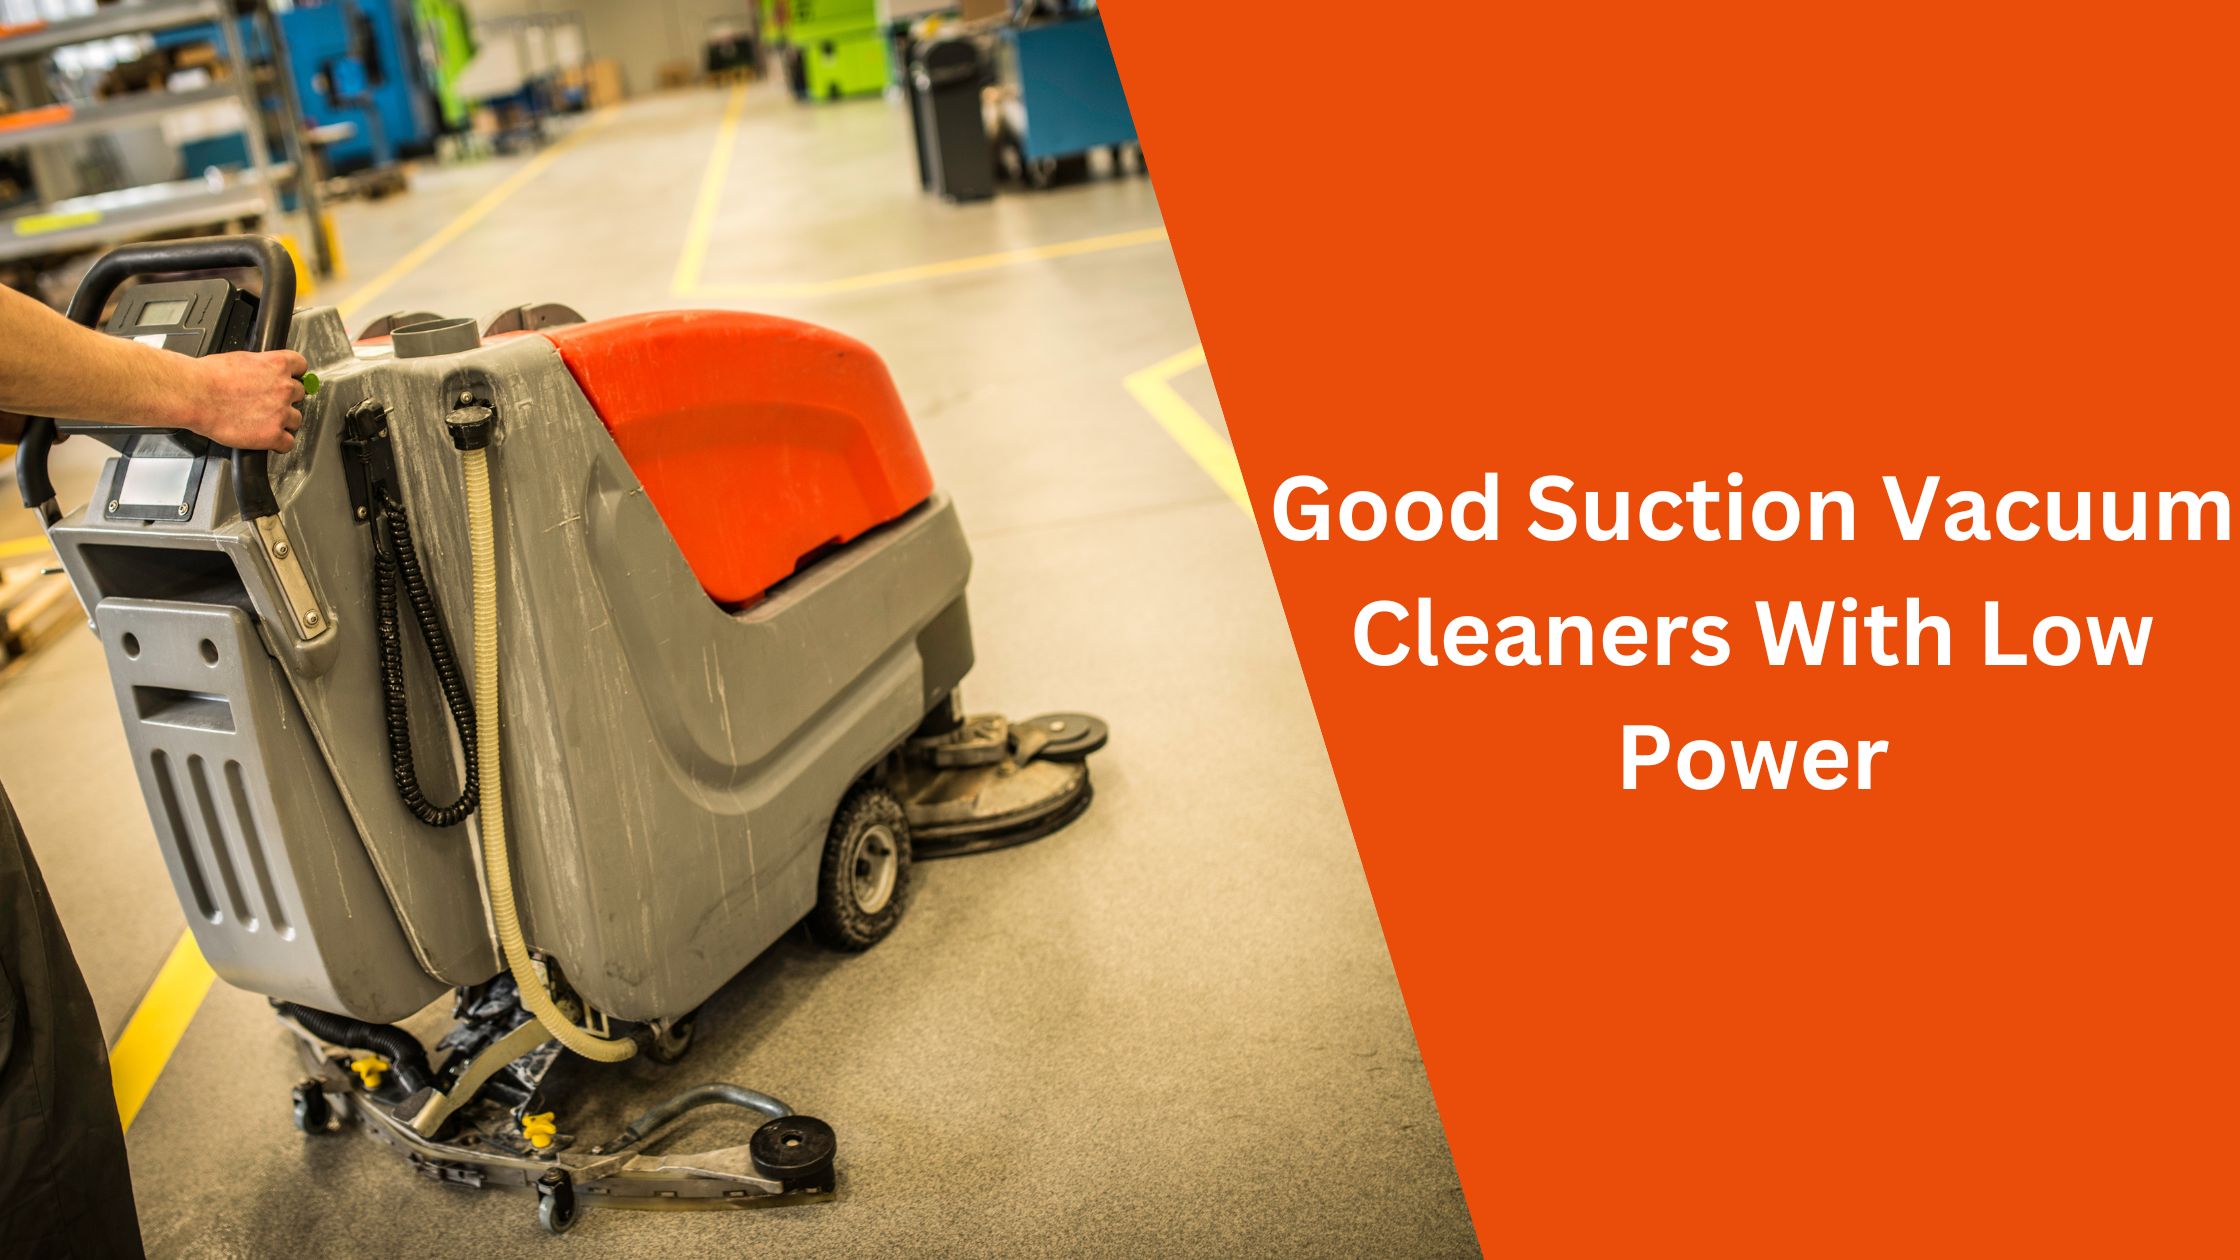 Good Suction Vacuum Cleaners With Low Power